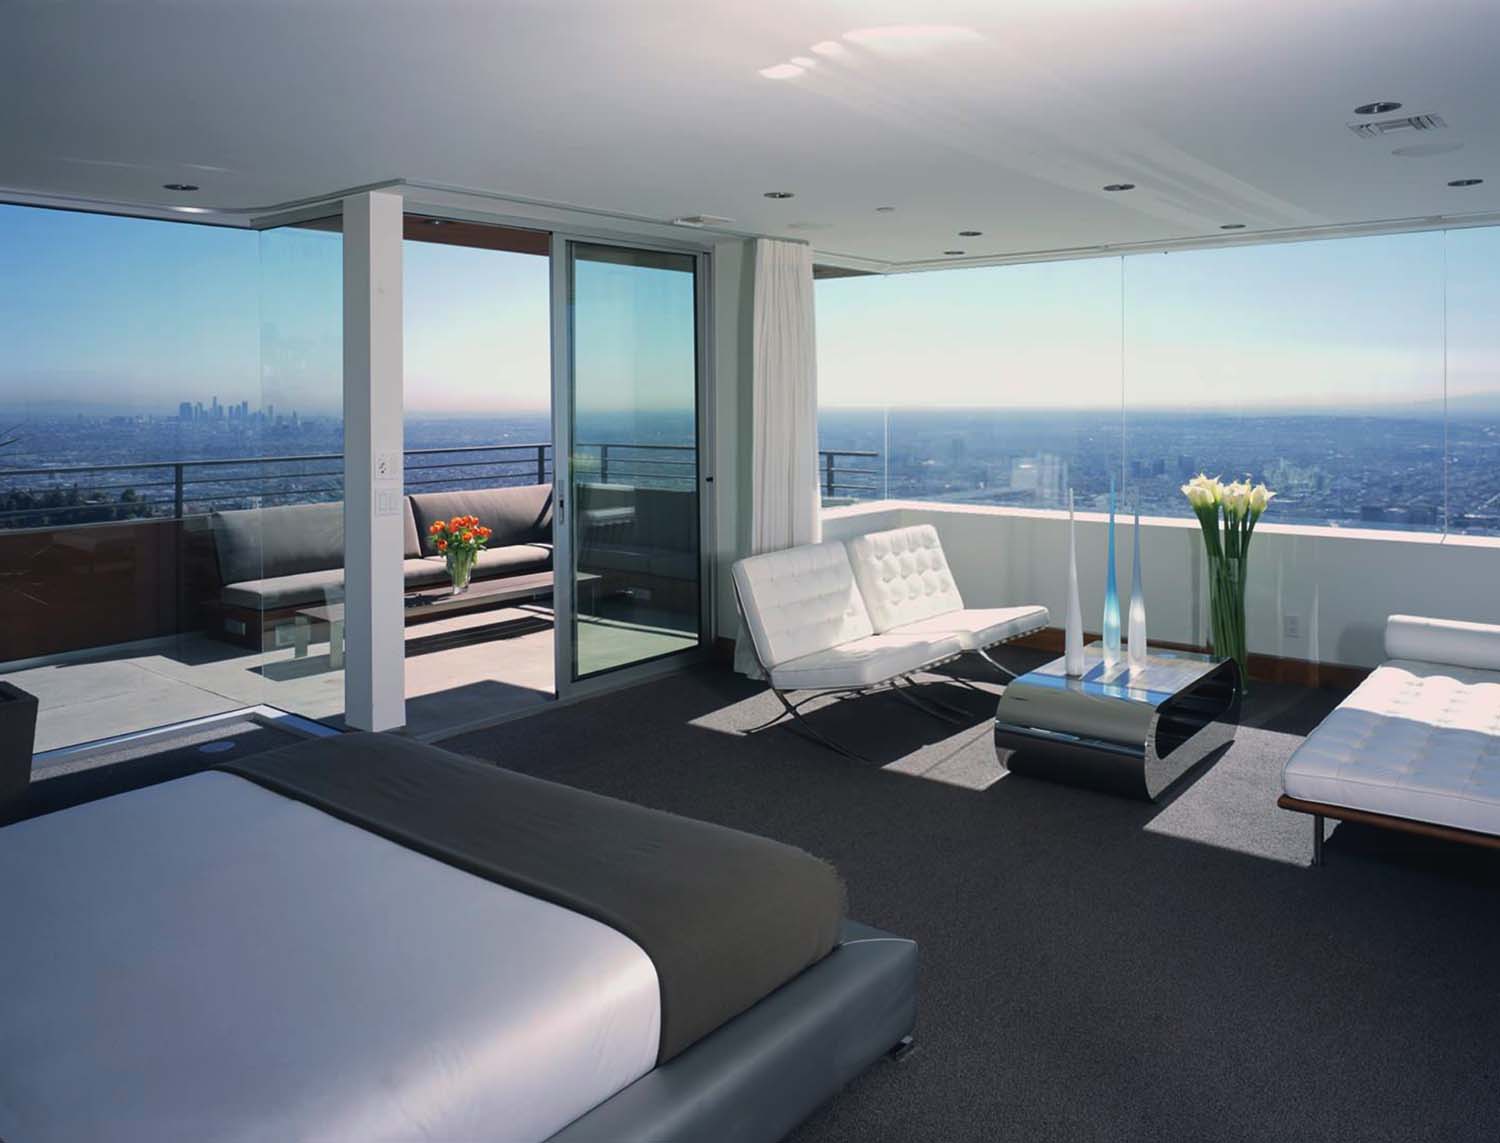 Rooms With Skyline Views-19-1 Kindesign